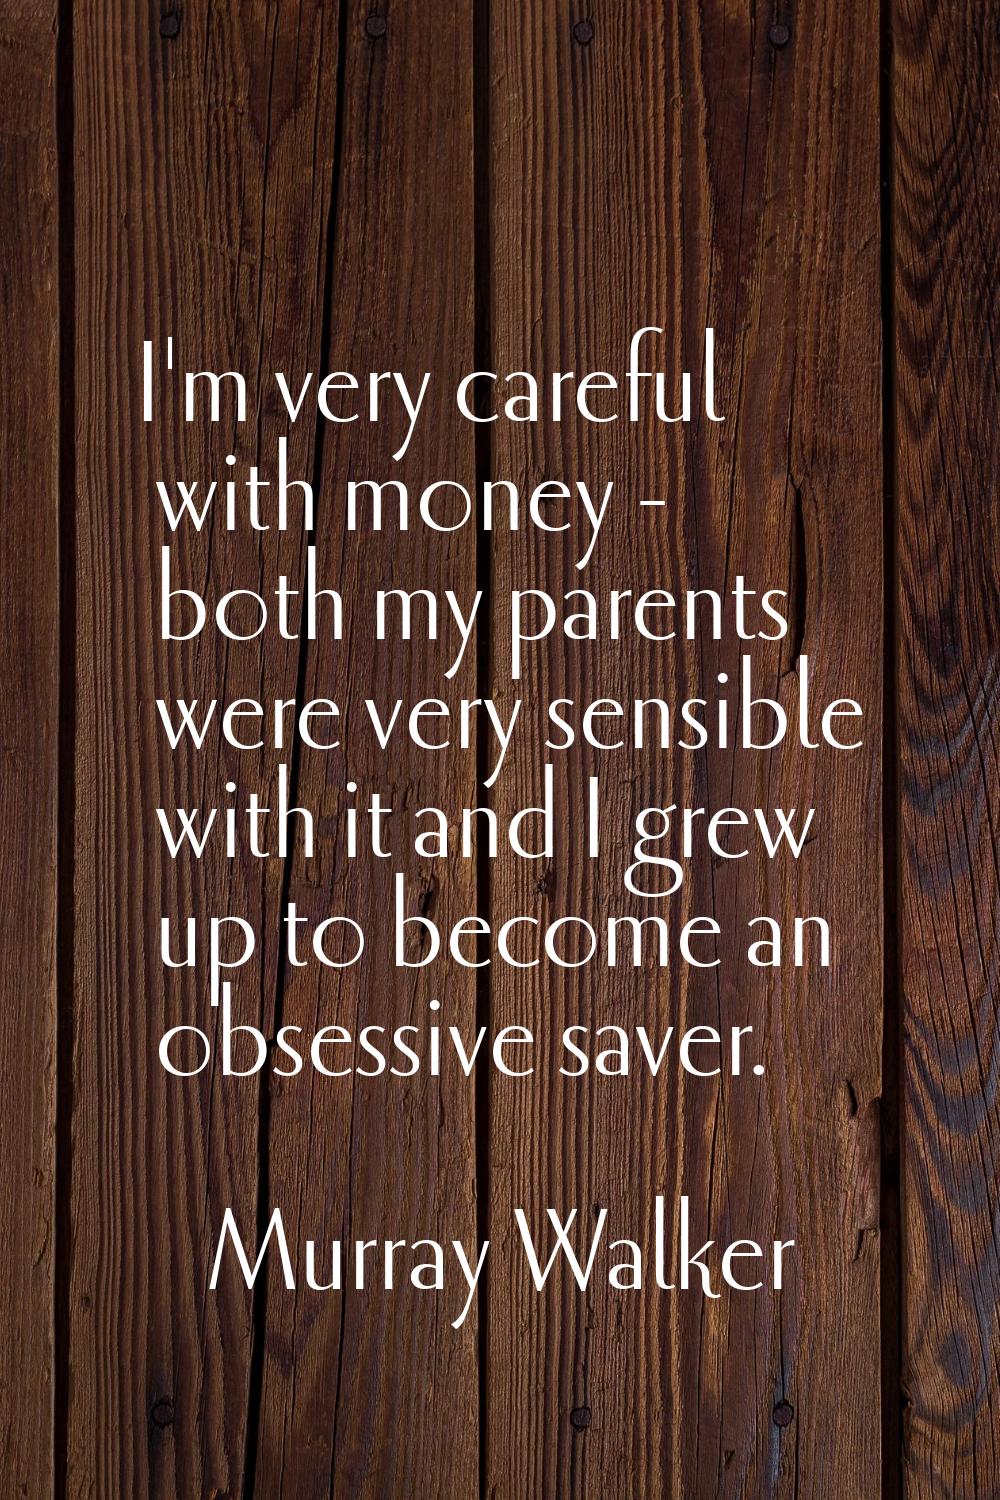 I'm very careful with money - both my parents were very sensible with it and I grew up to become an